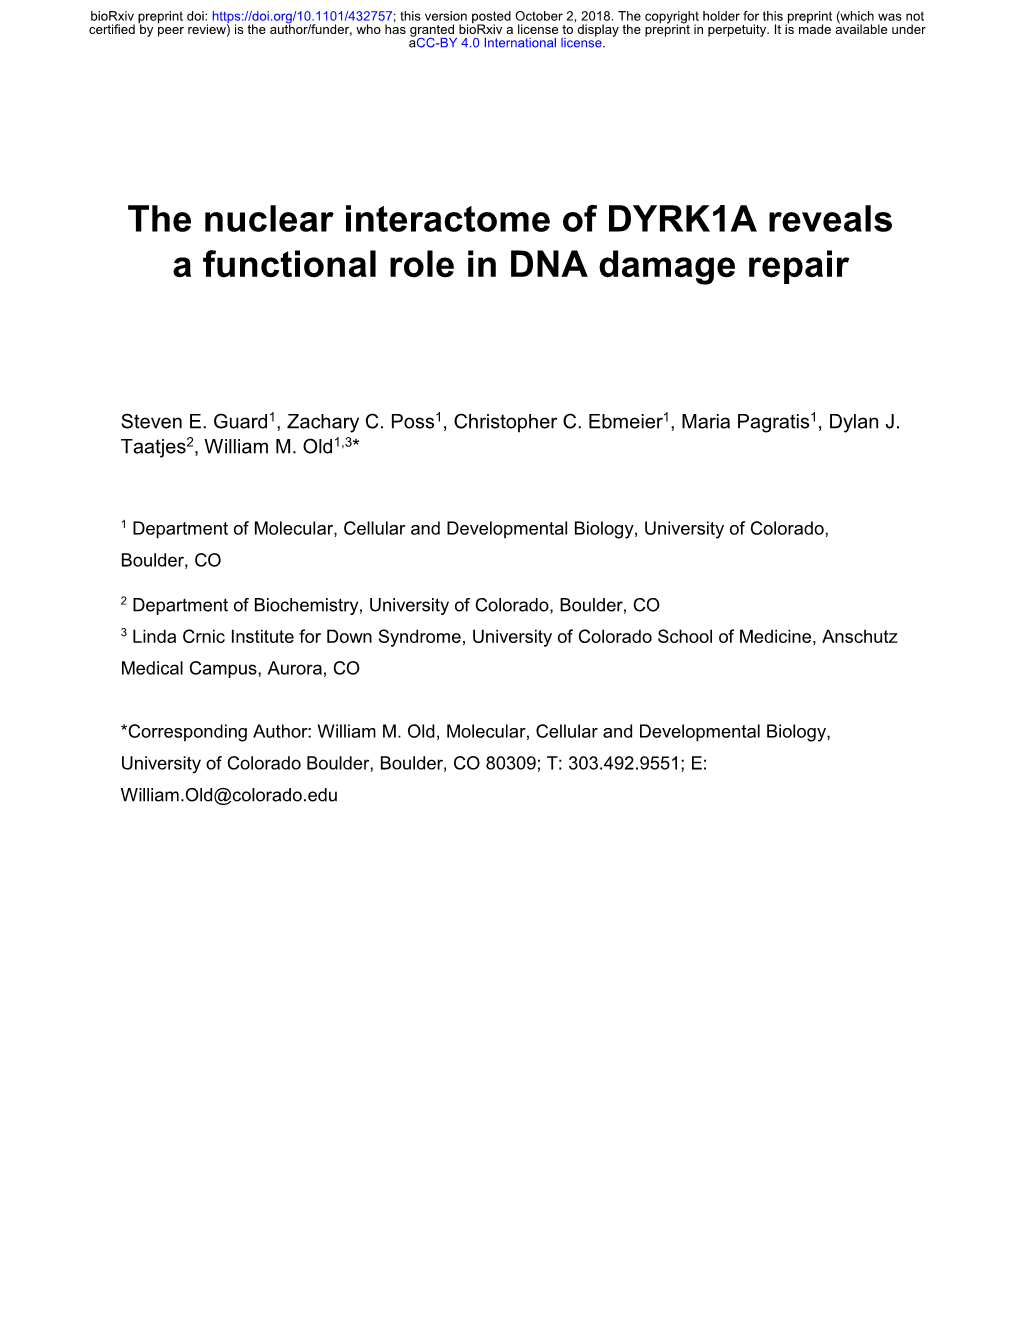 The Nuclear Interactome of DYRK1A Reveals a Functional Role in DNA Damage Repair